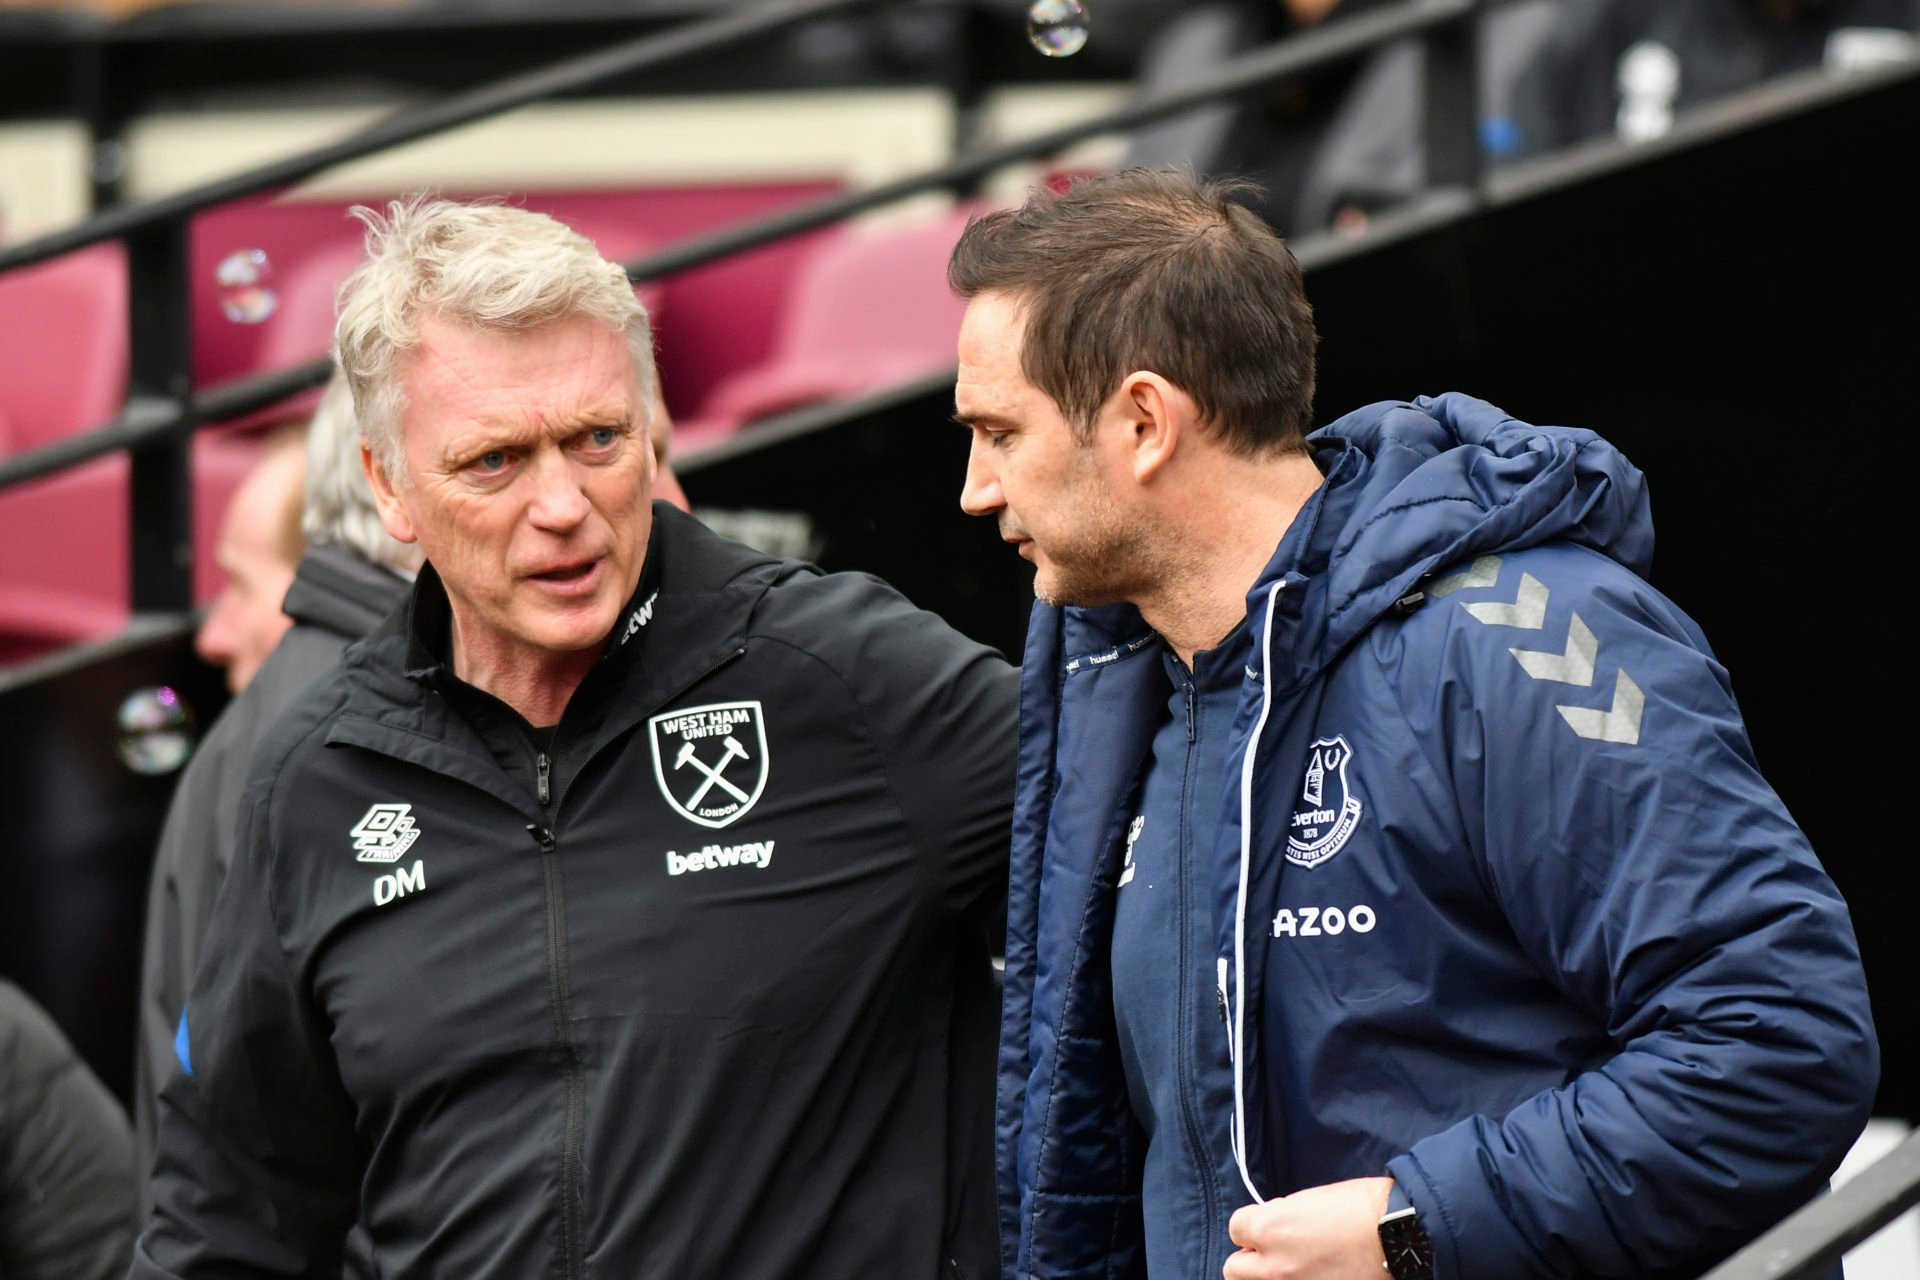 Everton vs West Ham on, new kick-off time and match selected for live TV